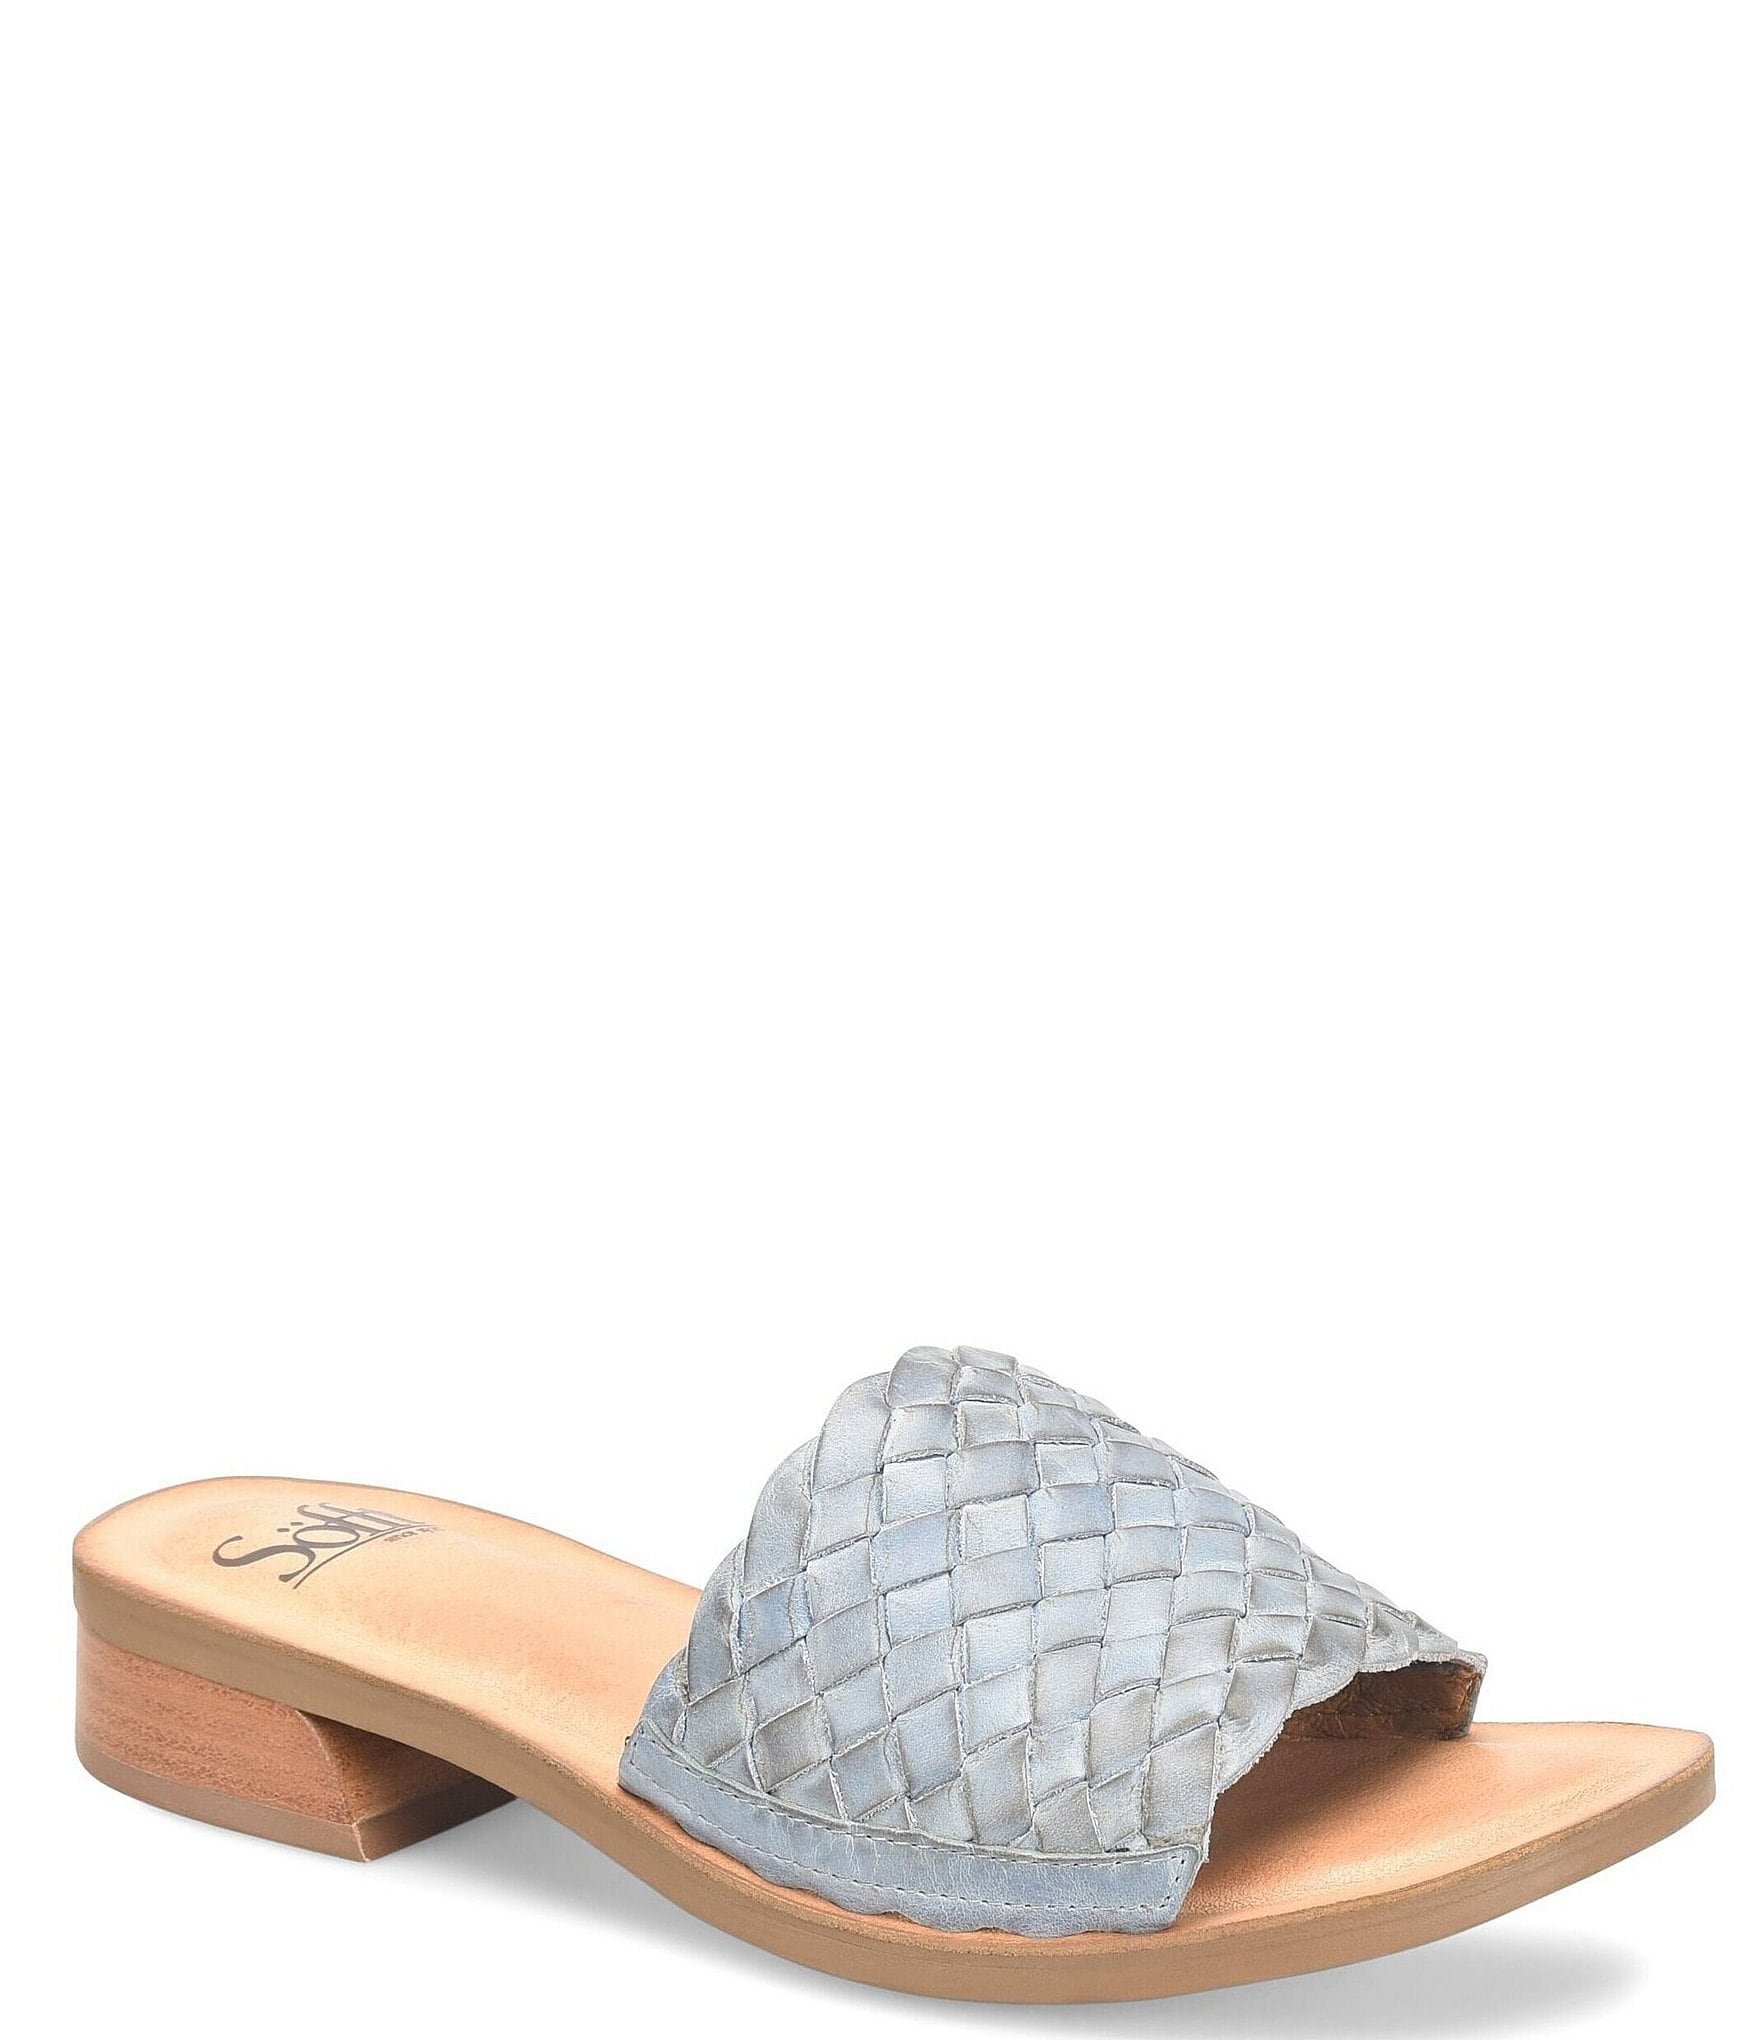 Sofft Ardee Woven Leather Slides | Dillard's